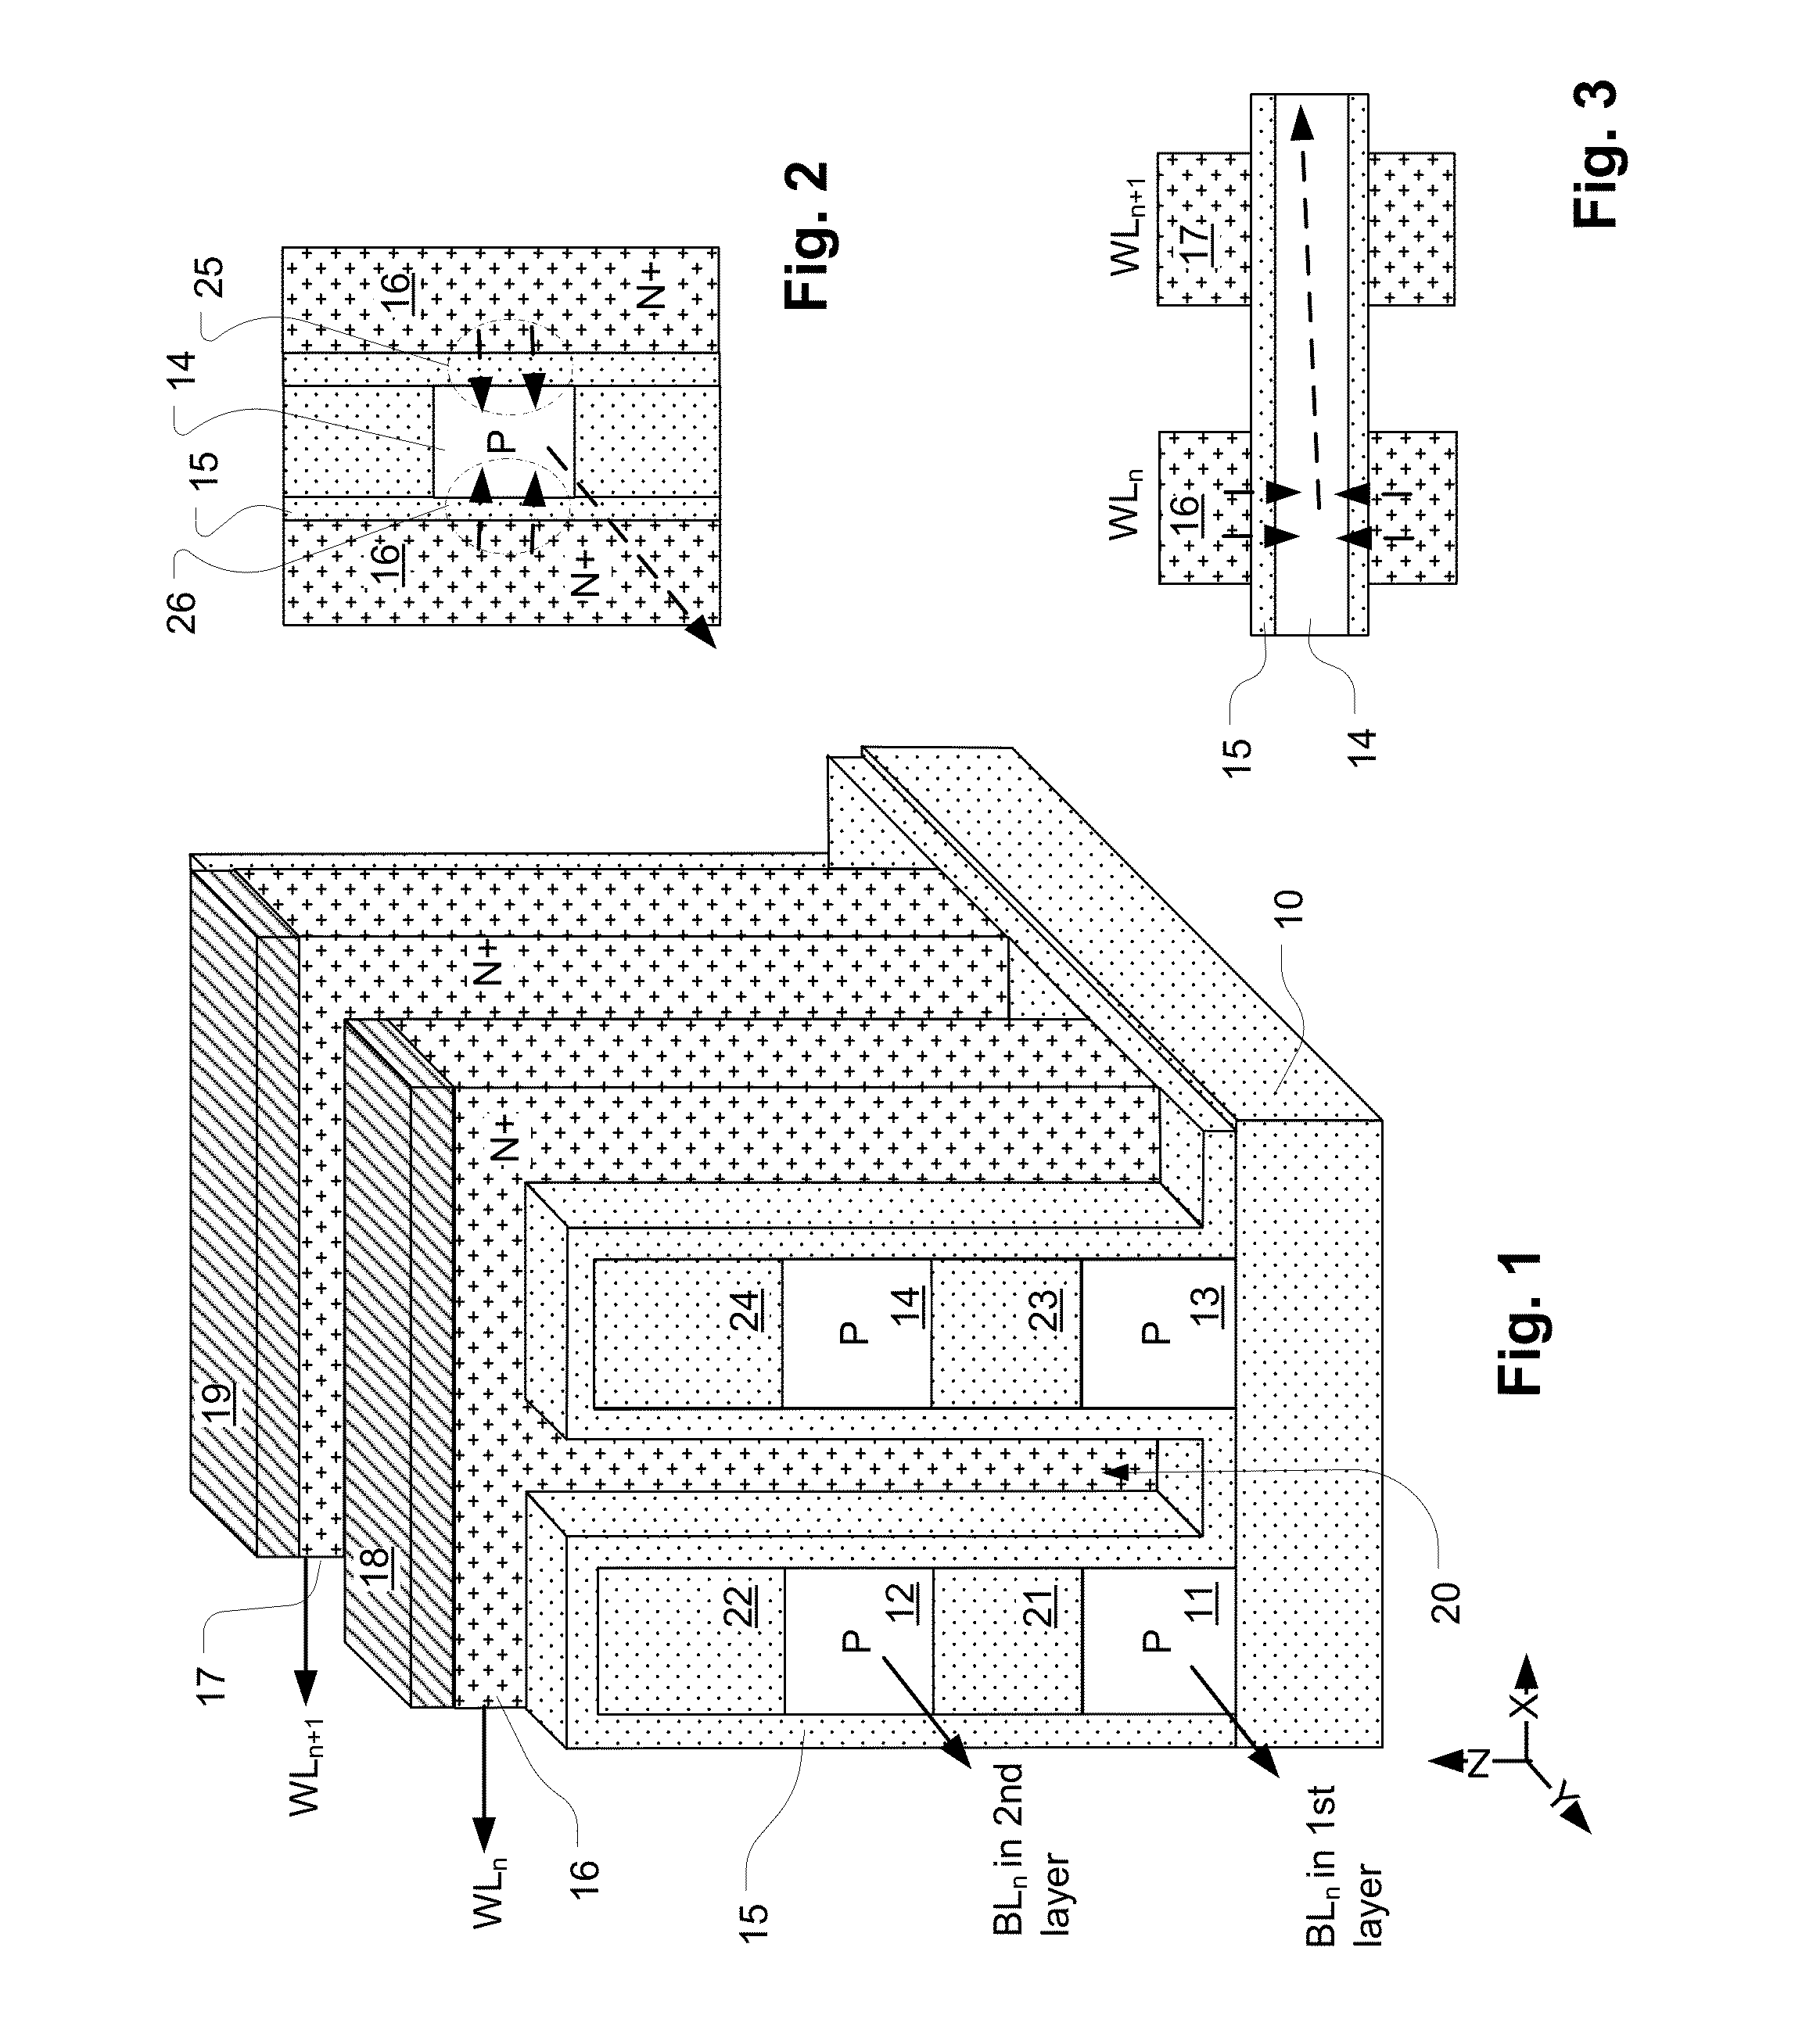 Memory architecture of 3D array with alternating memory string orientation and string select structures